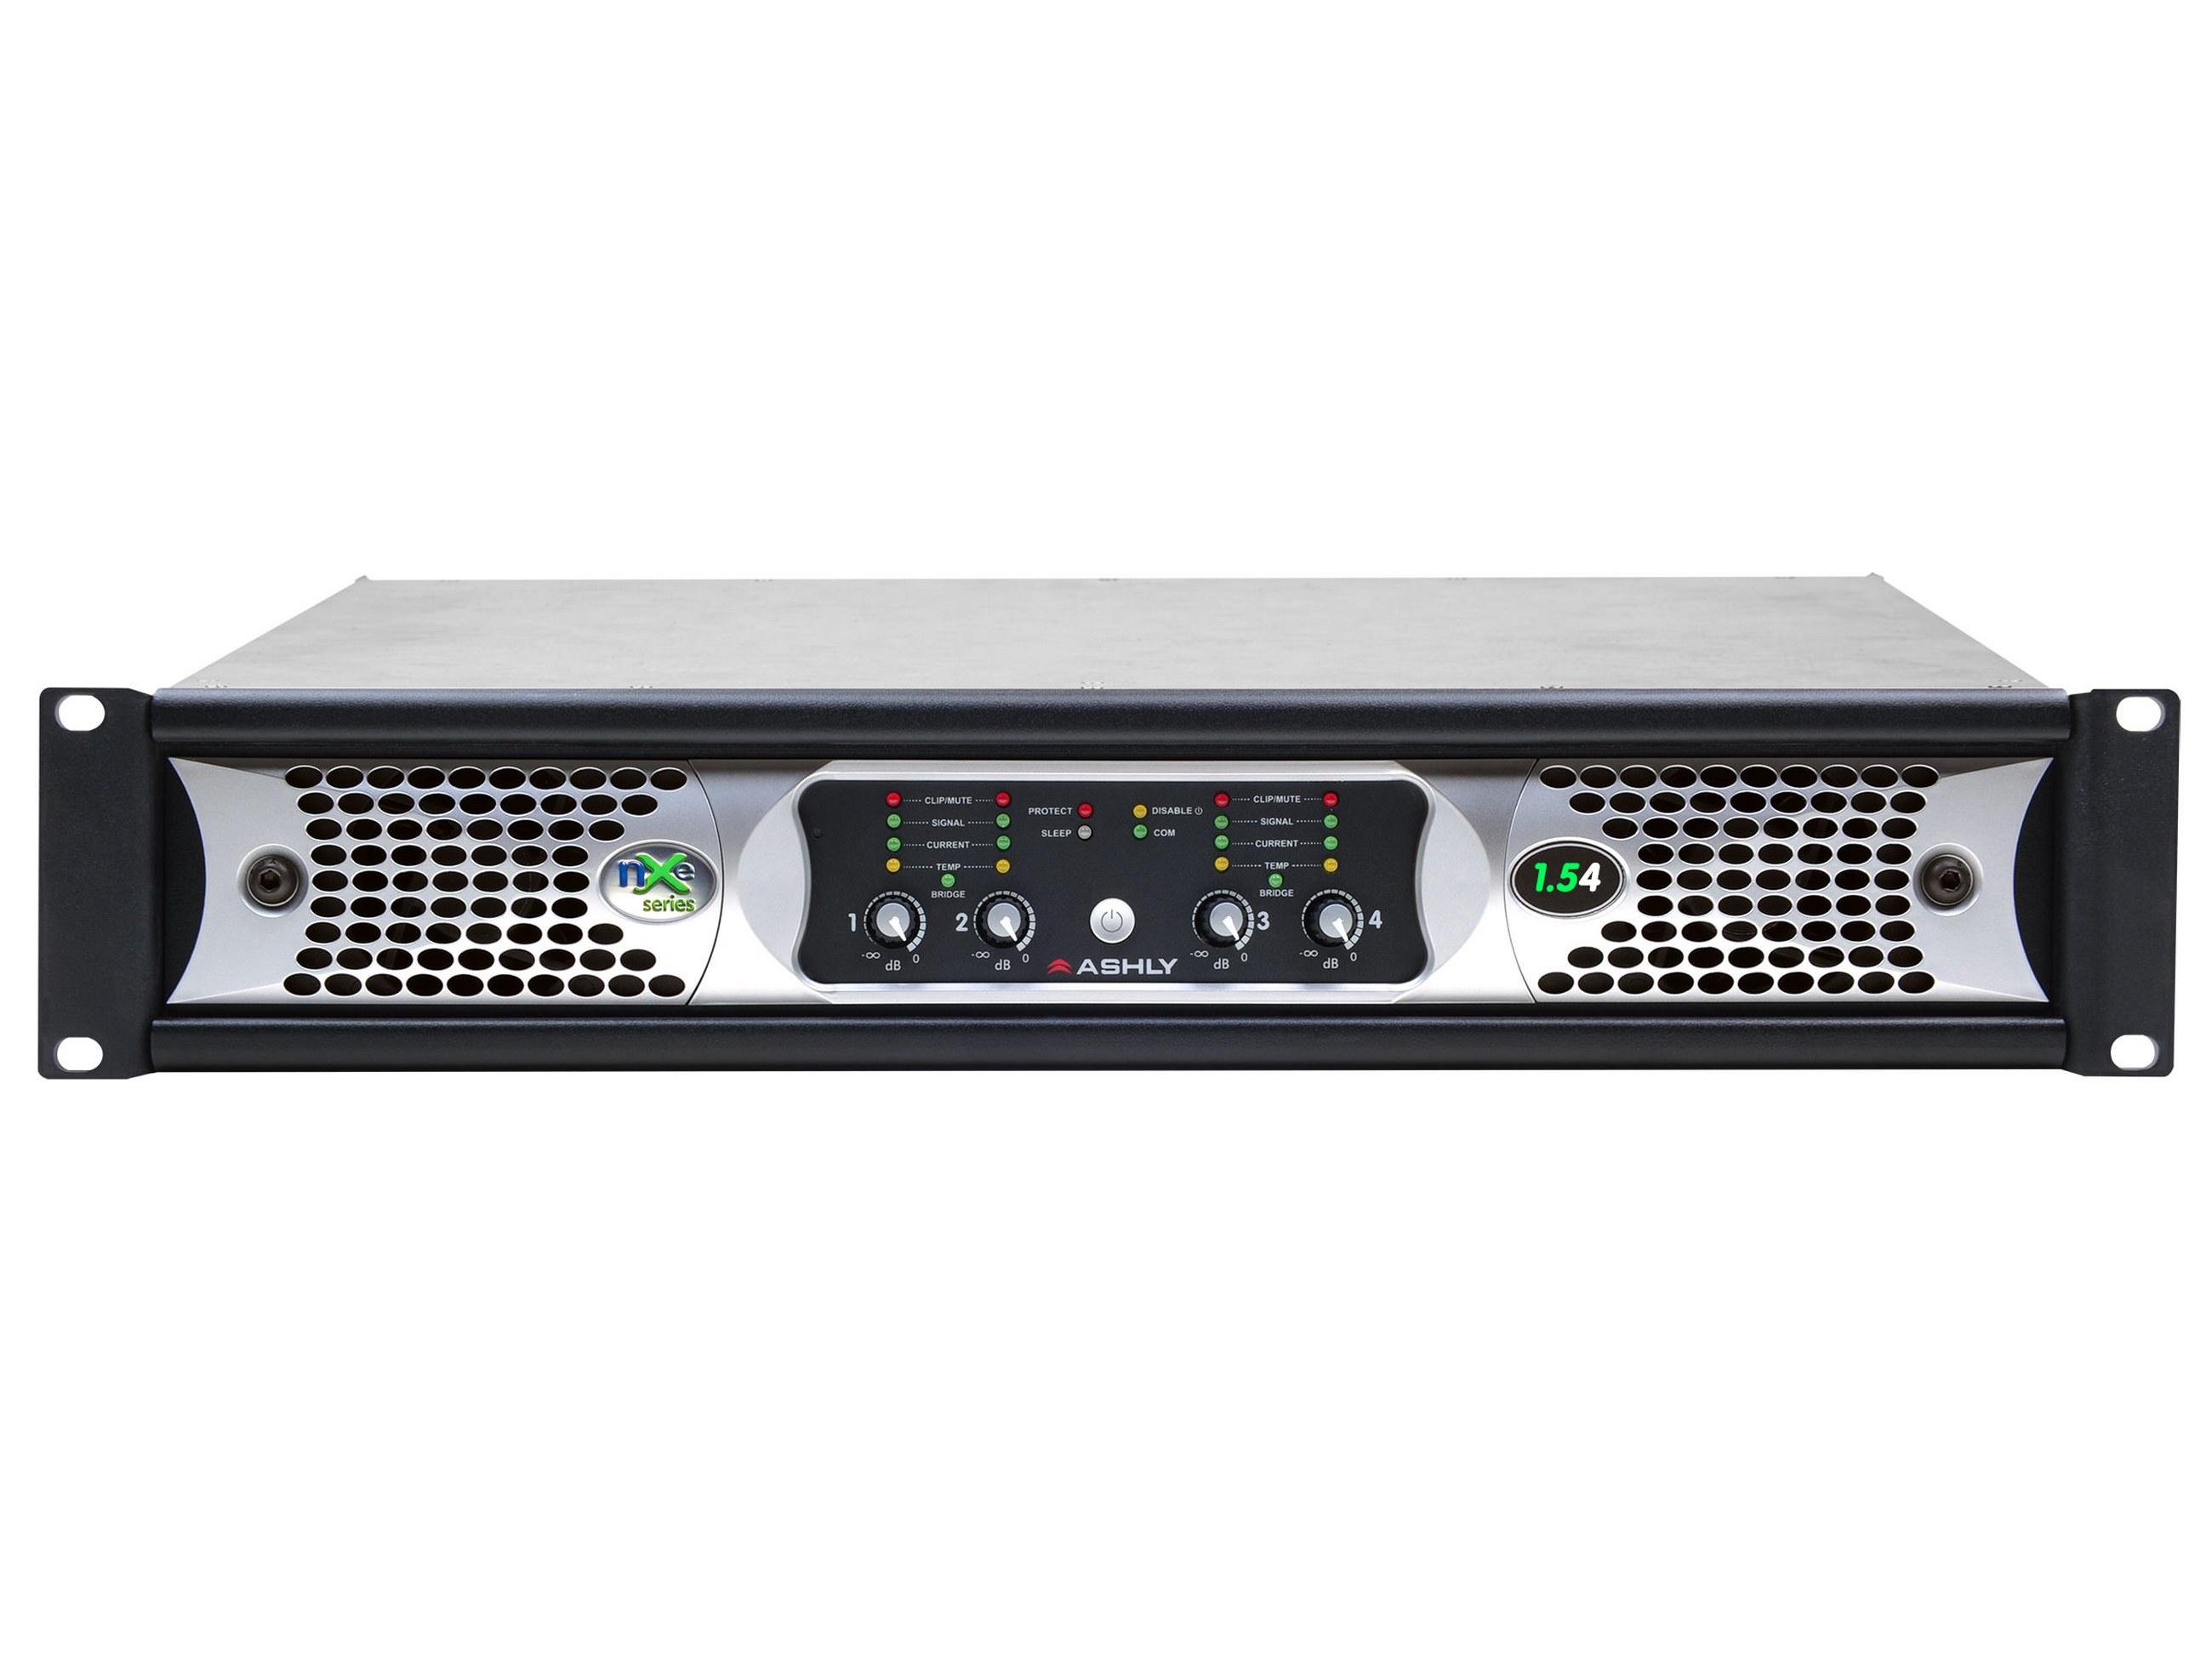 nXe1.54bd 4x 1500 Watts/2 Ohms Network Power Amplifier with OPDante and OPDAC4 Option Cards by Ashly